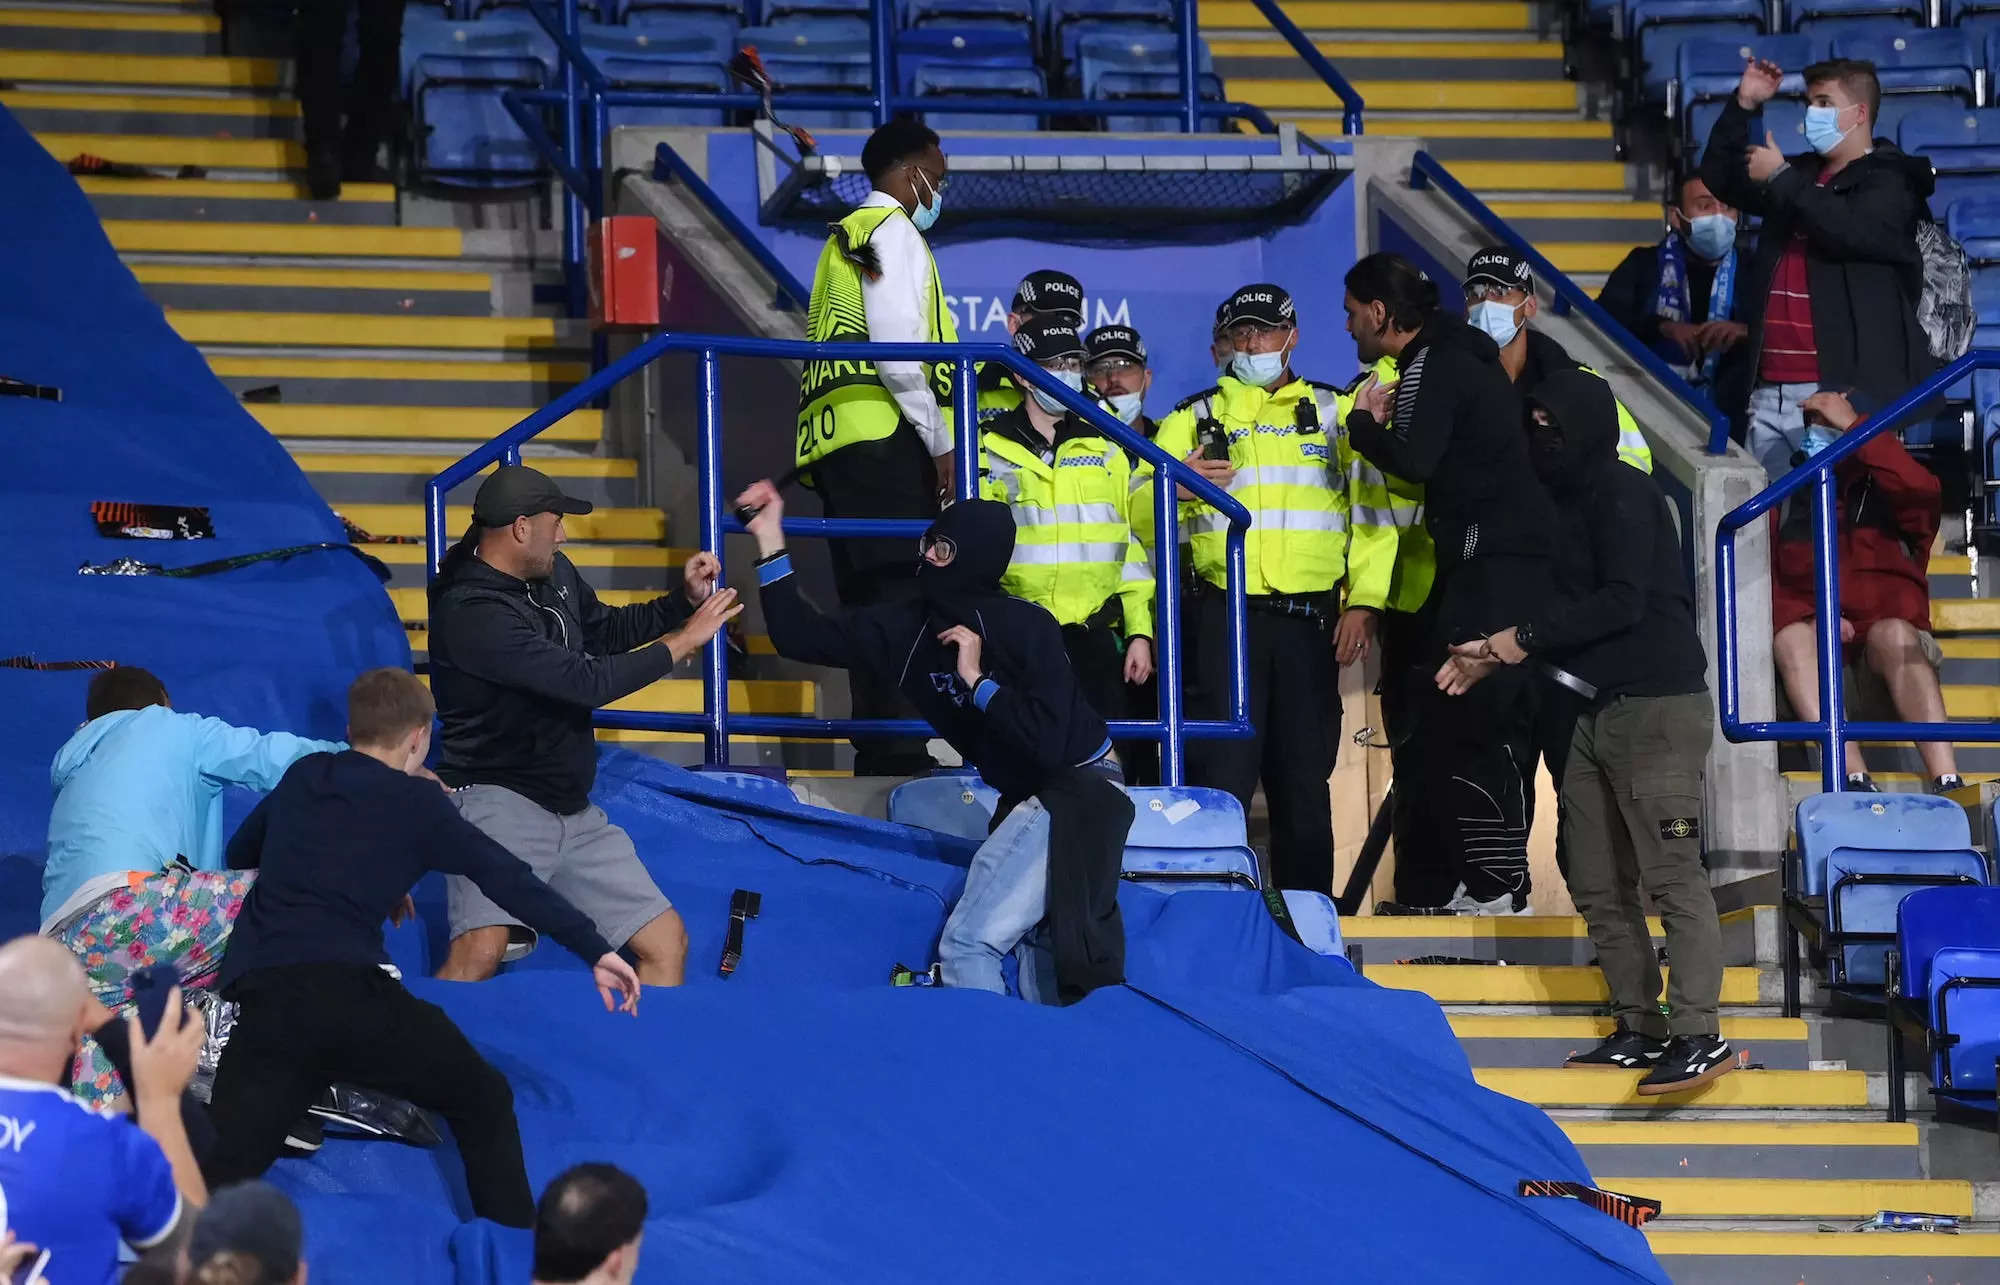 Leicester and Napoli fans clash at the King Power Stadium